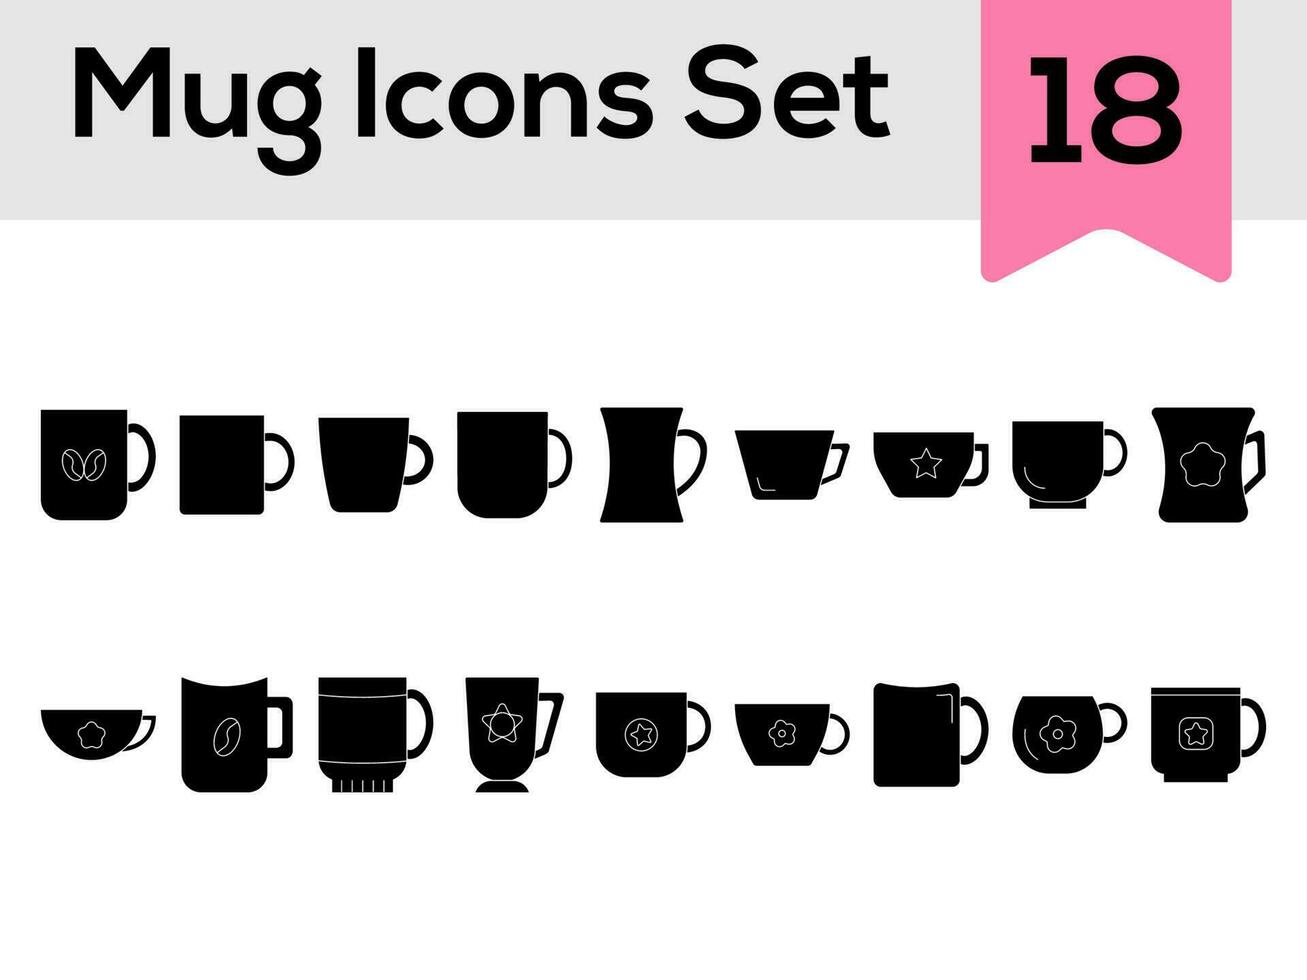 Illustration Of Cup Or Mug Icon Set In Flat Style. vector